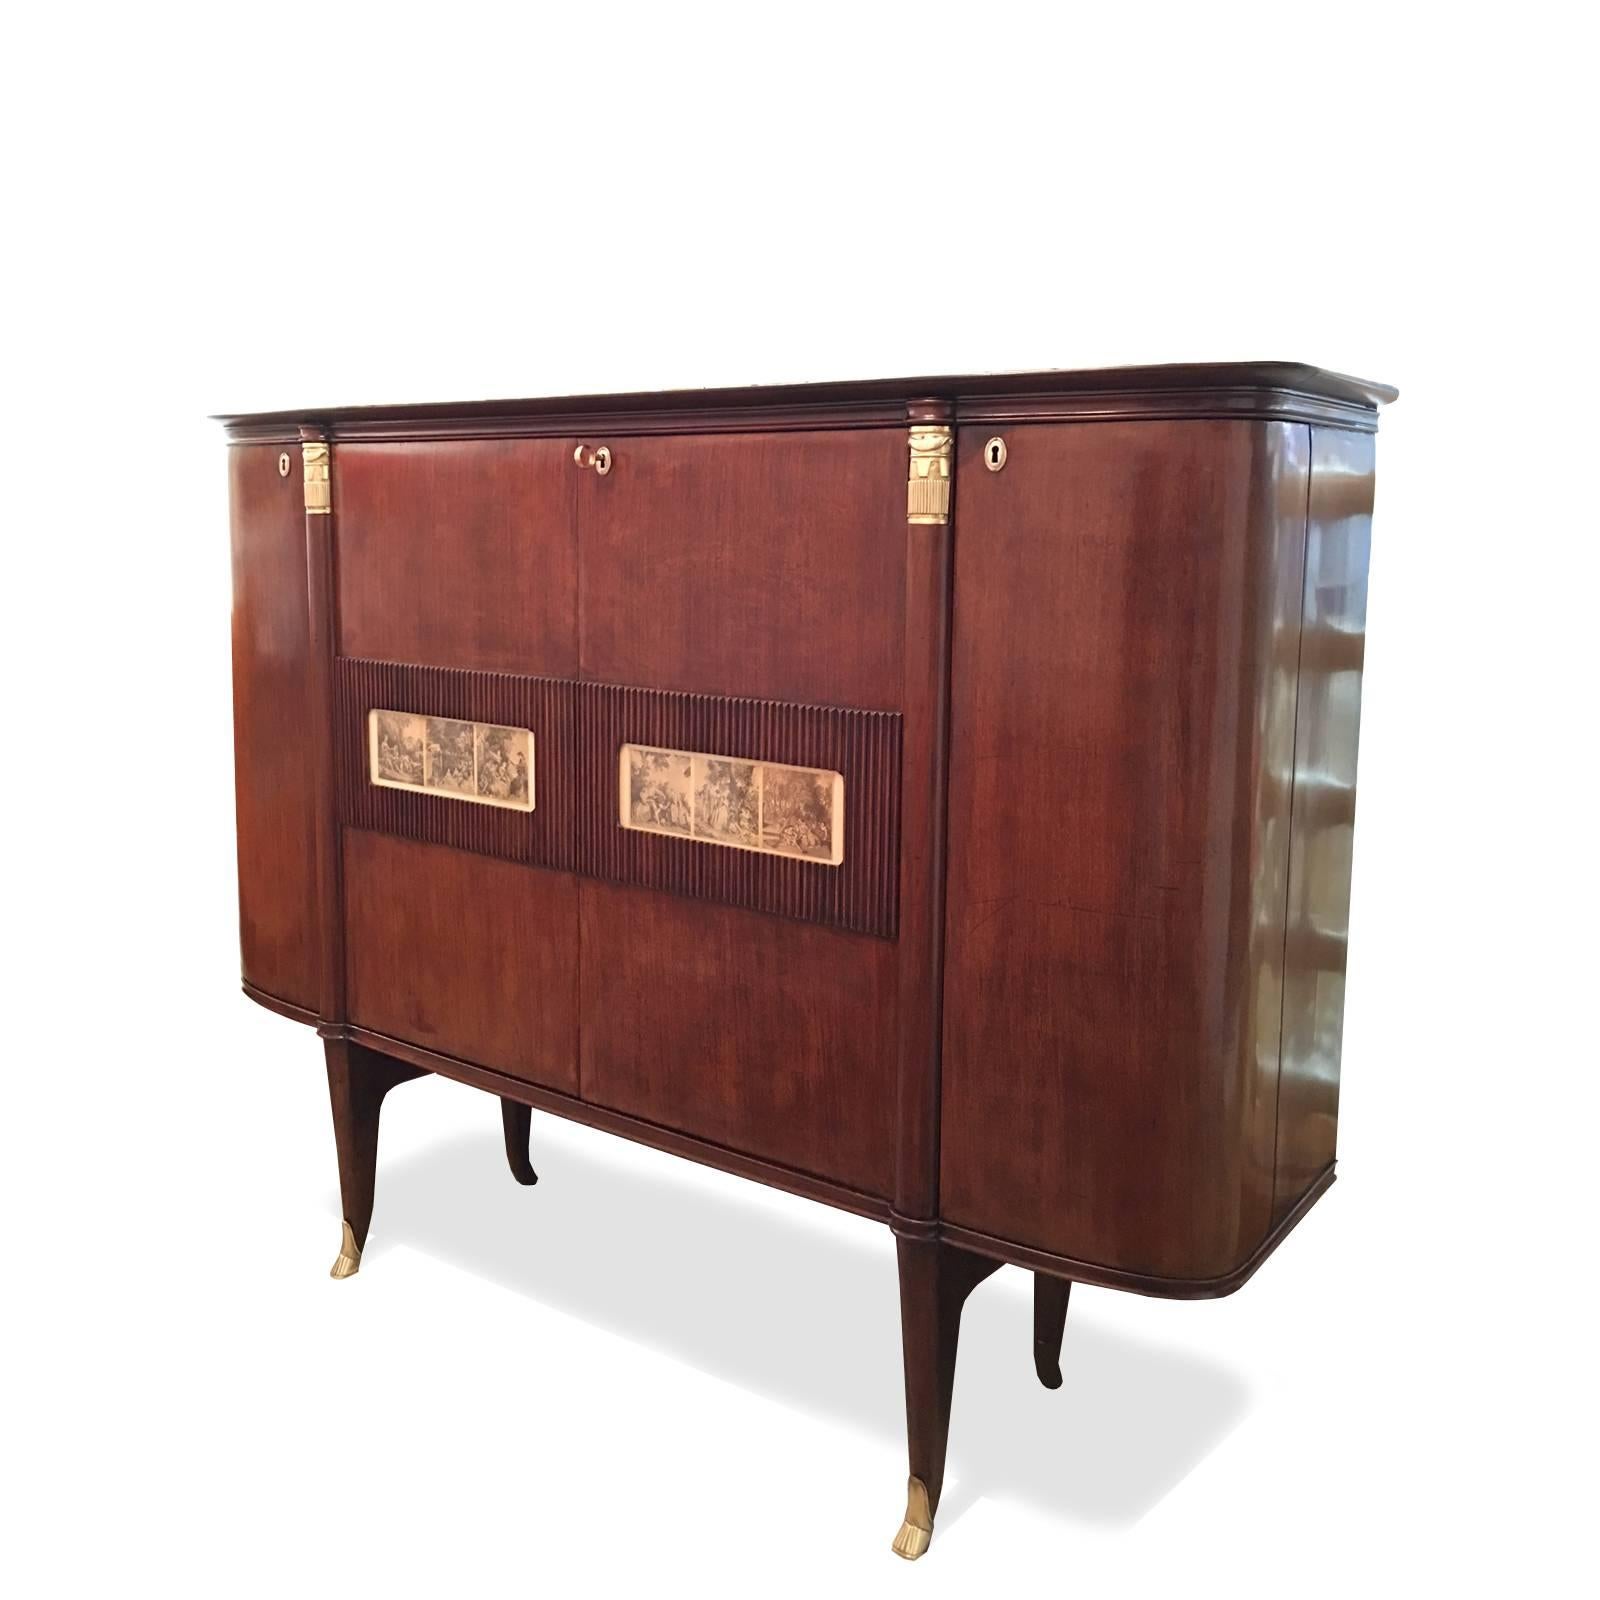 This very elegant bar cabinet has two tall side curved doors with shelves behind and a main central compartment composed by two engraved mahogany doors embellished by bronze mounts and 18th century lithographs of classical scenes. The interior is